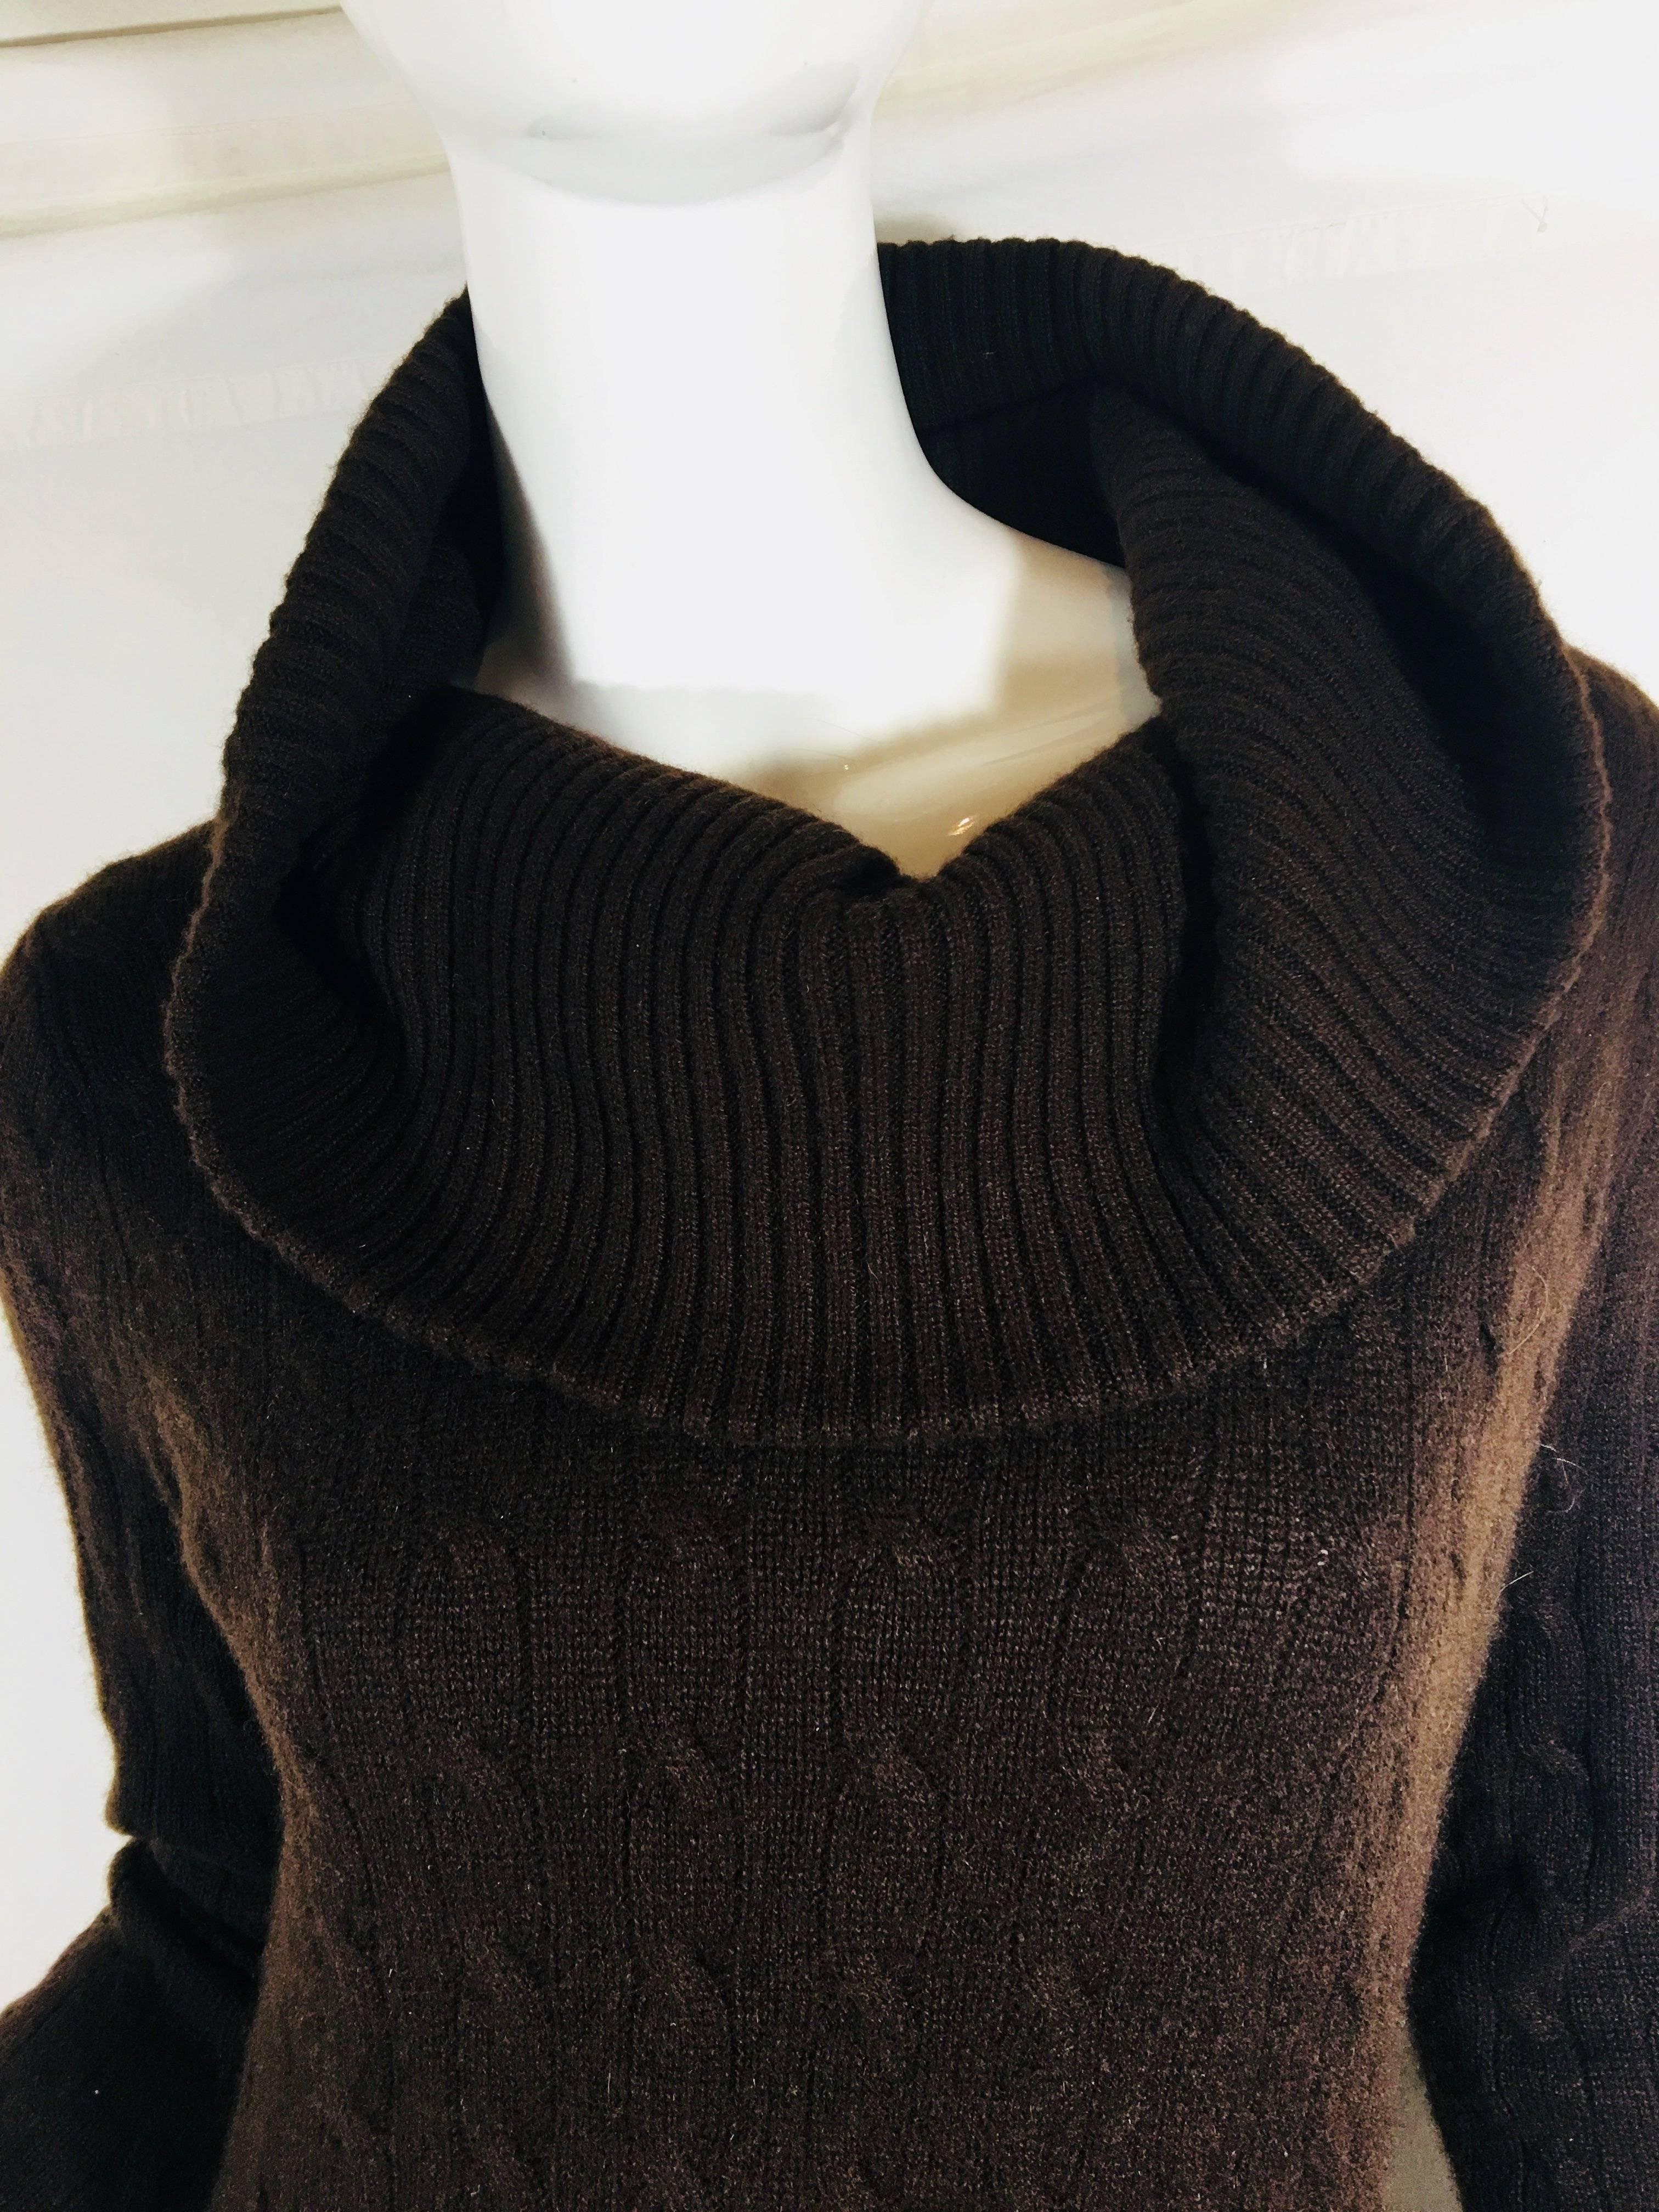 Ralph Lauren Cashmere Cable Knit Sweater with Two Front Pockets. Can be worn Off the Shoulder or Oversized Cowl Neck.